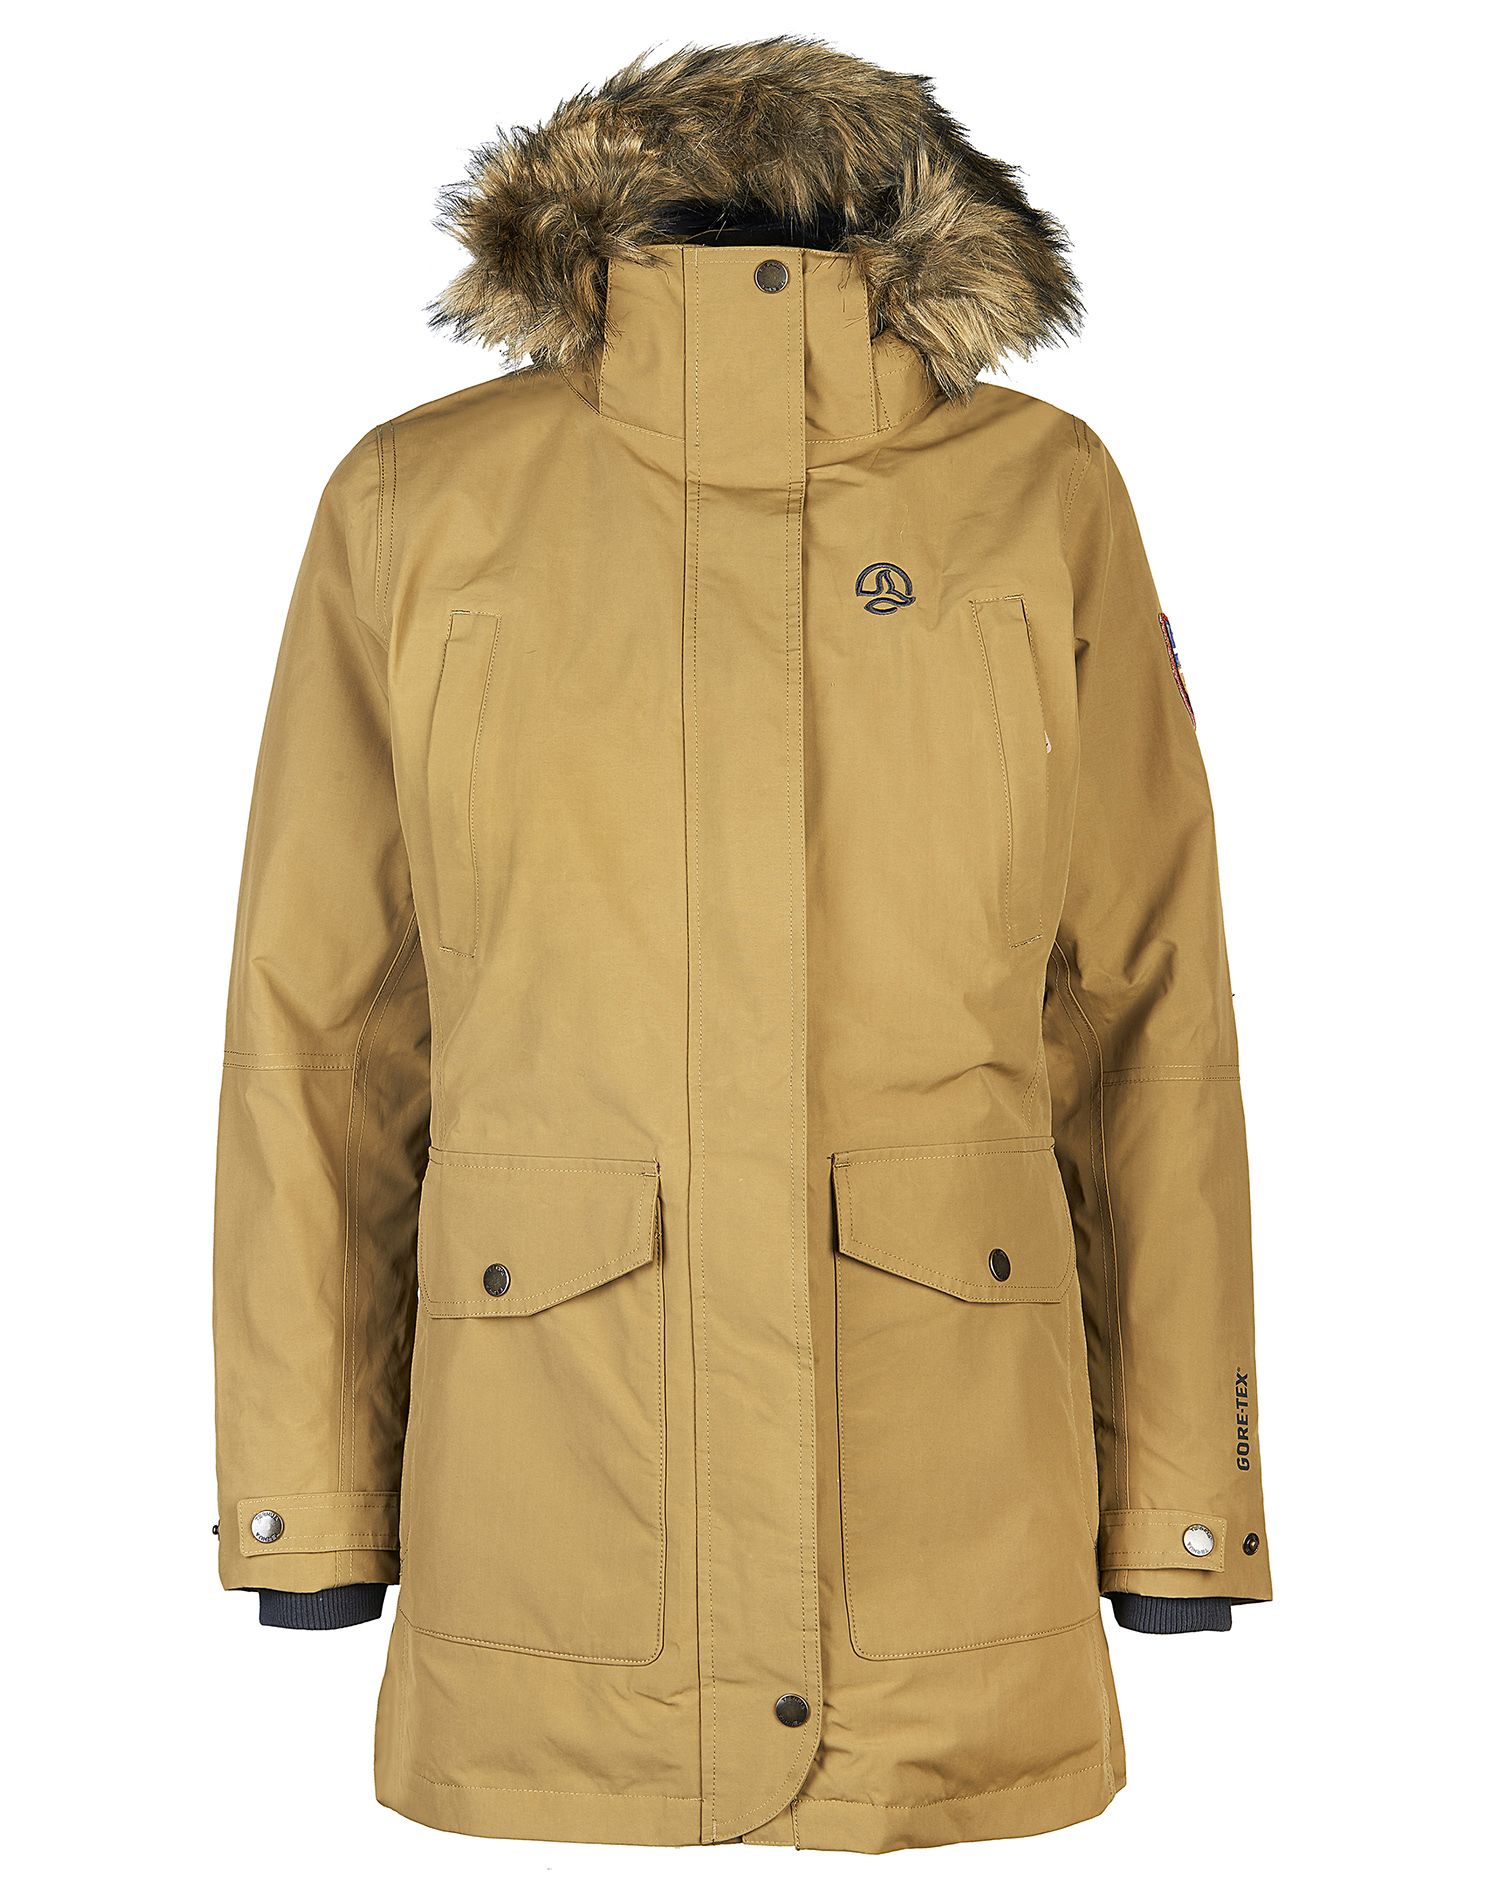 Ternua - South River Jacket - Giacca invernale - Donna